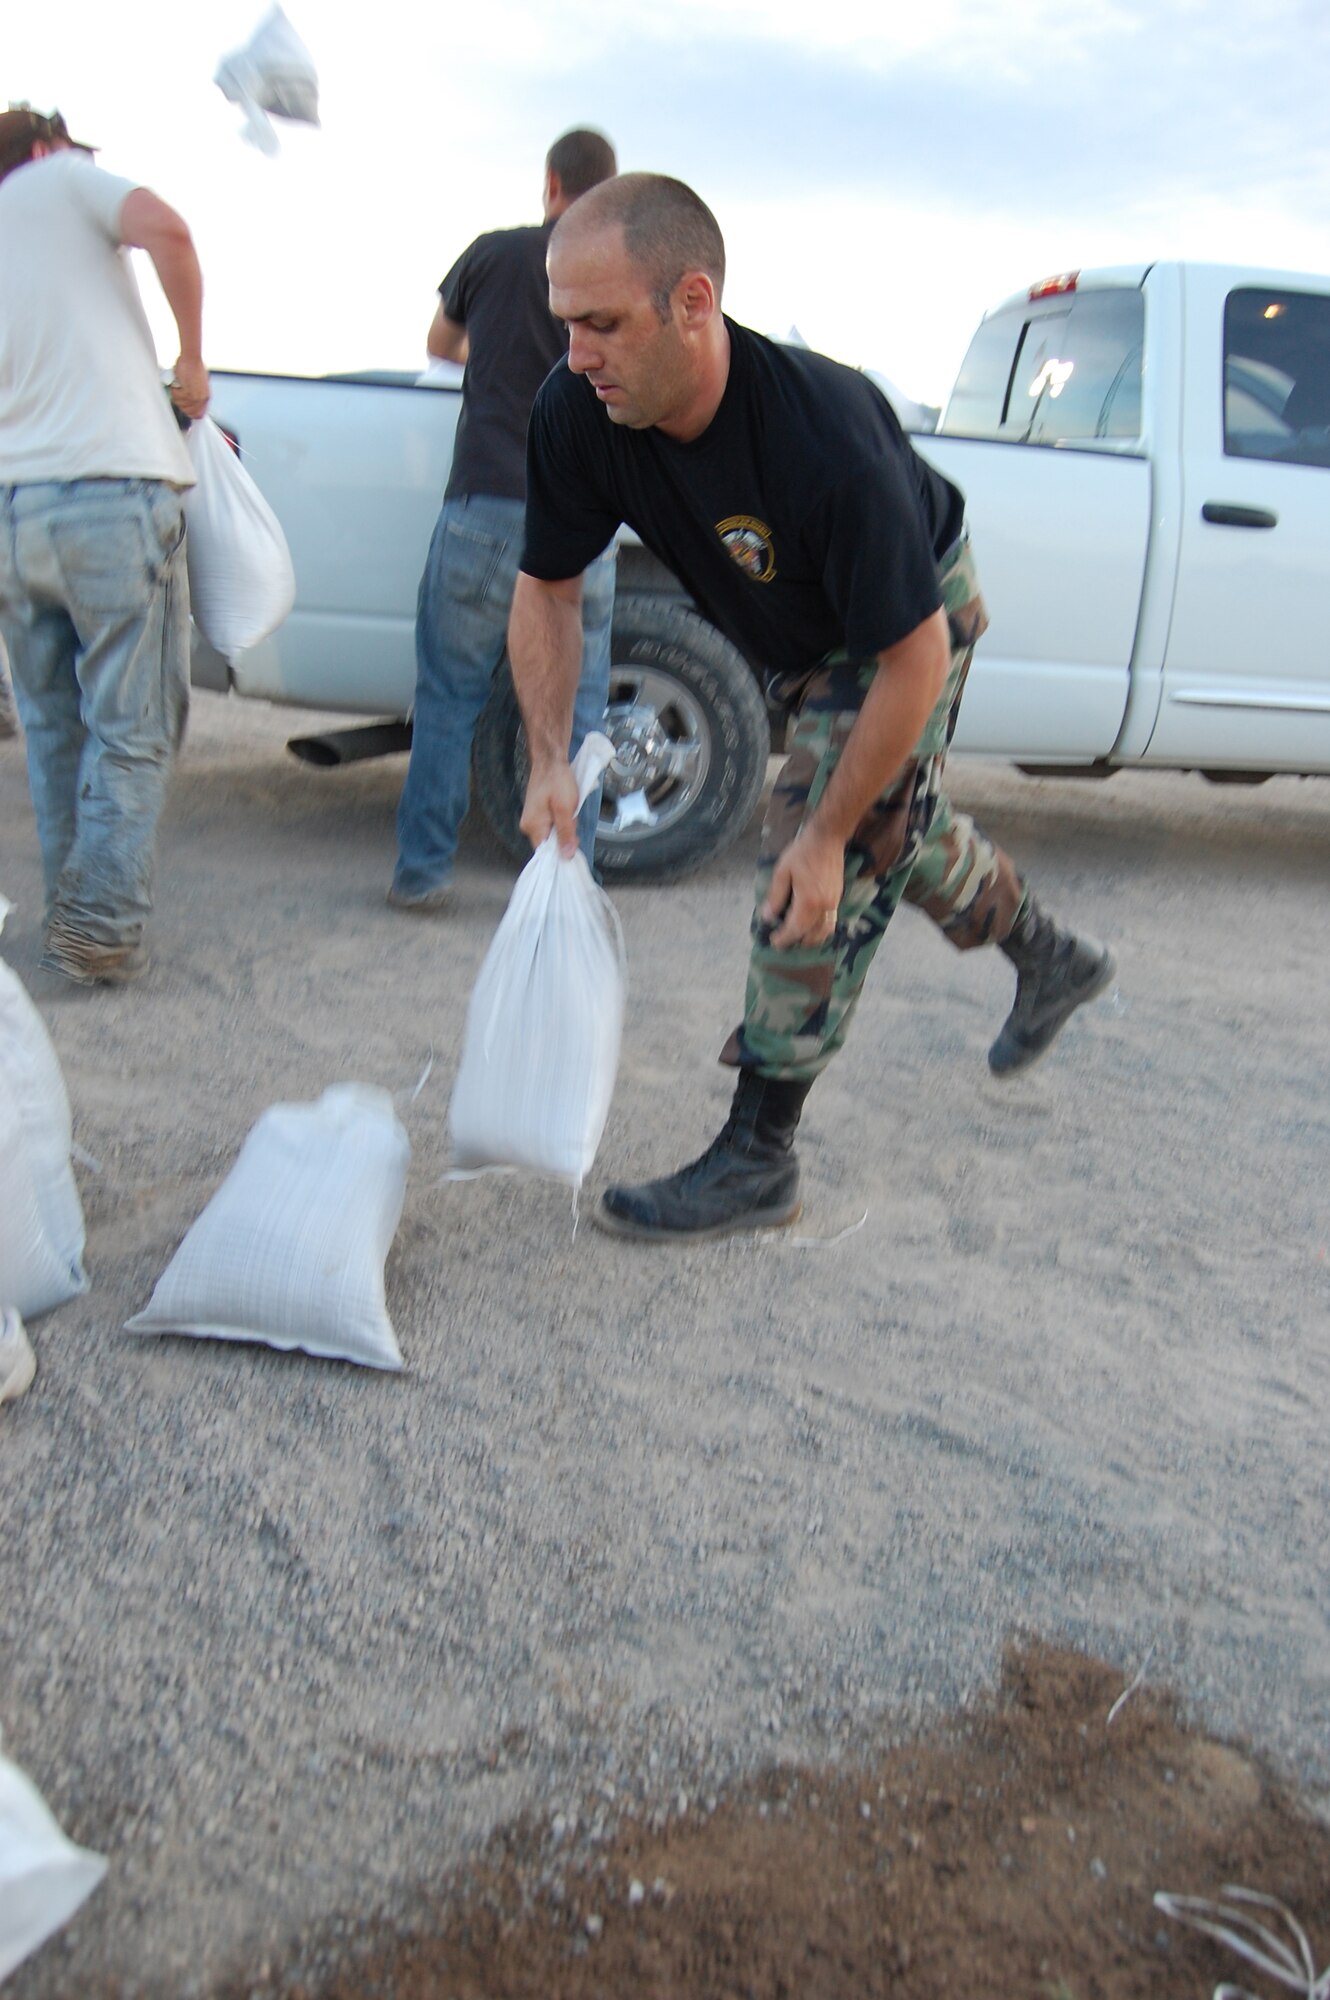 Staff Sgt. Rodney Massengill, of Cheyenne, Wyo., a member of the Wyoming Air National Guard's 153rd Medical Group, tosses sandbags in an effort to mitigate rising flood waters of the Popo Agie River, in Fremont County, Wyoming.  Massengill is assigned to the Wyoming National Guard Task Force 2-300th, for this state active duty mission. (Released)